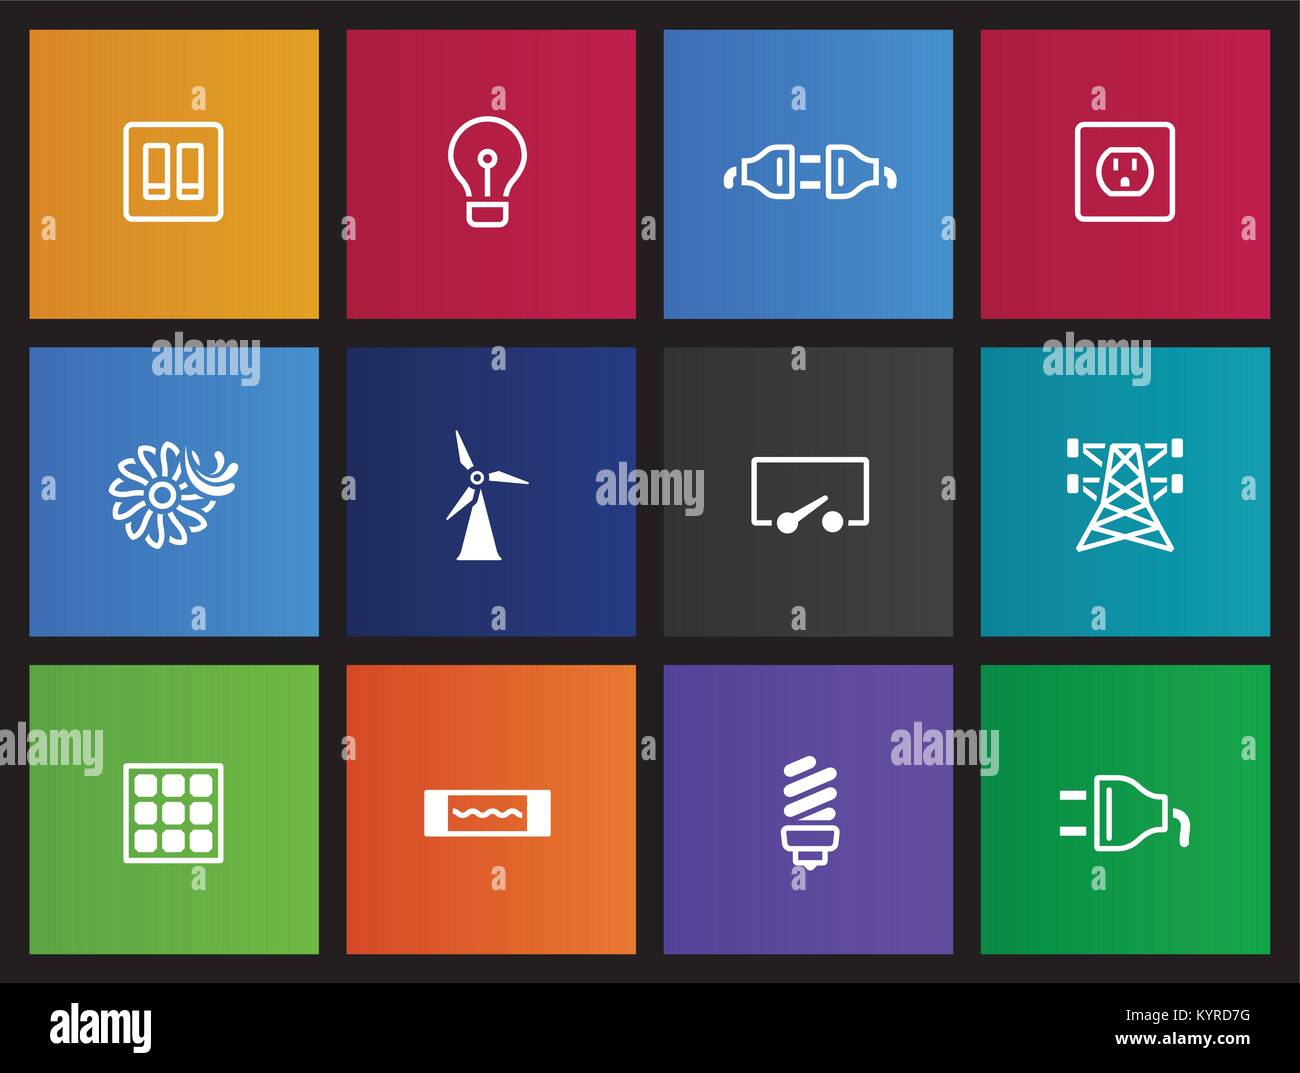 Electricity icons in Metro style. Stock Vector